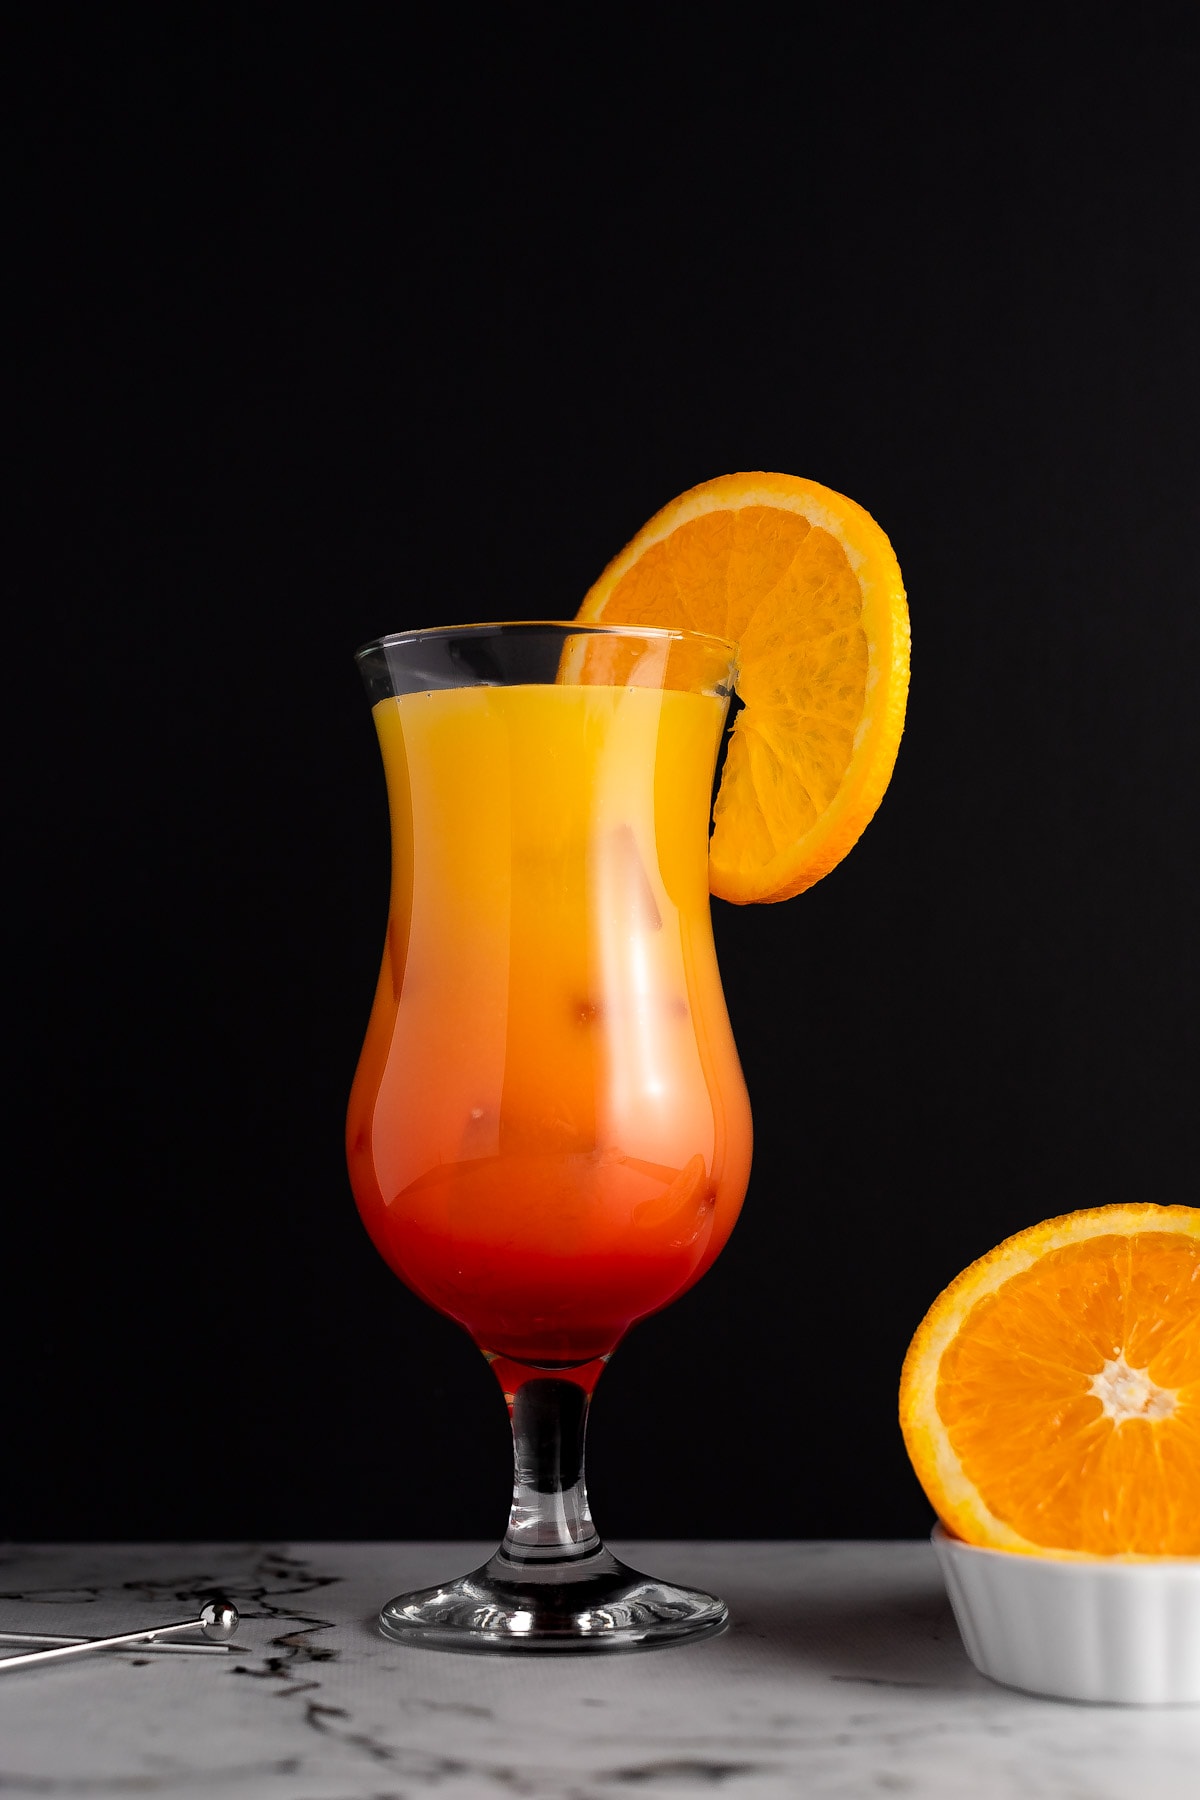 Sunrise cocktail garnished with an orange slice, on a black background, next to a couple cocktail picks and a slice of orange.